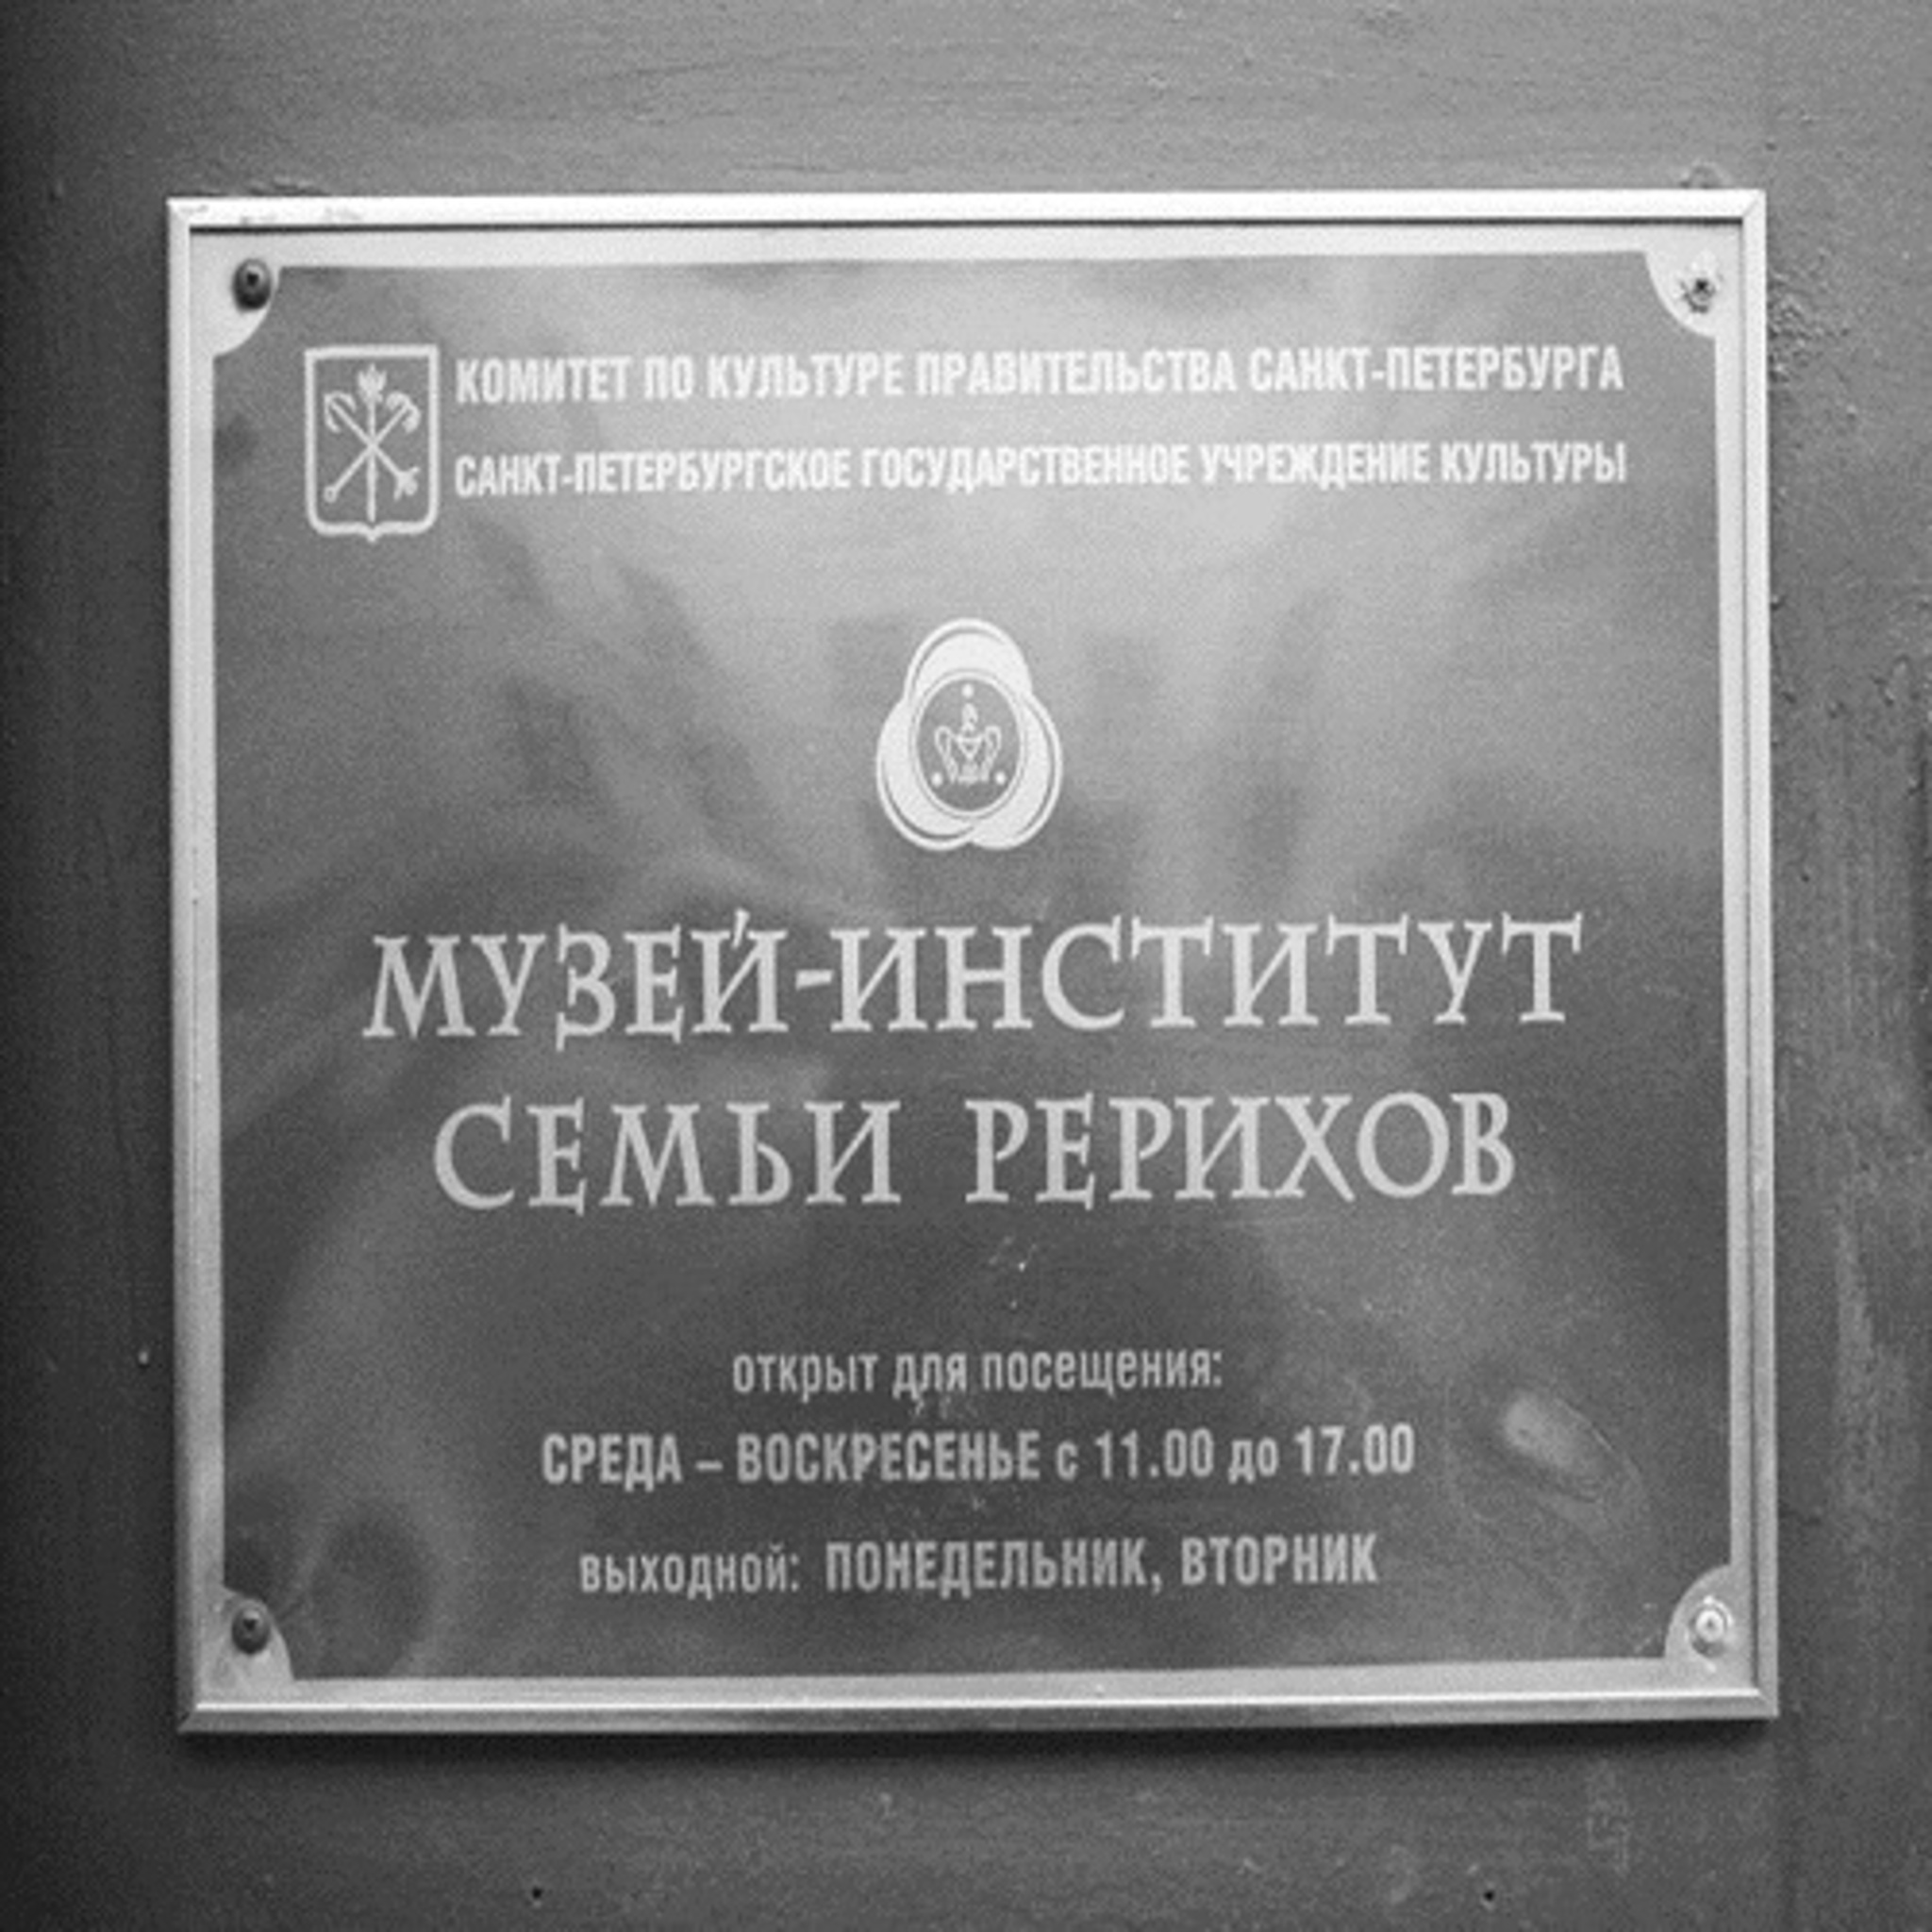 St. Petersburg State Museum and Institute of the Roerich family